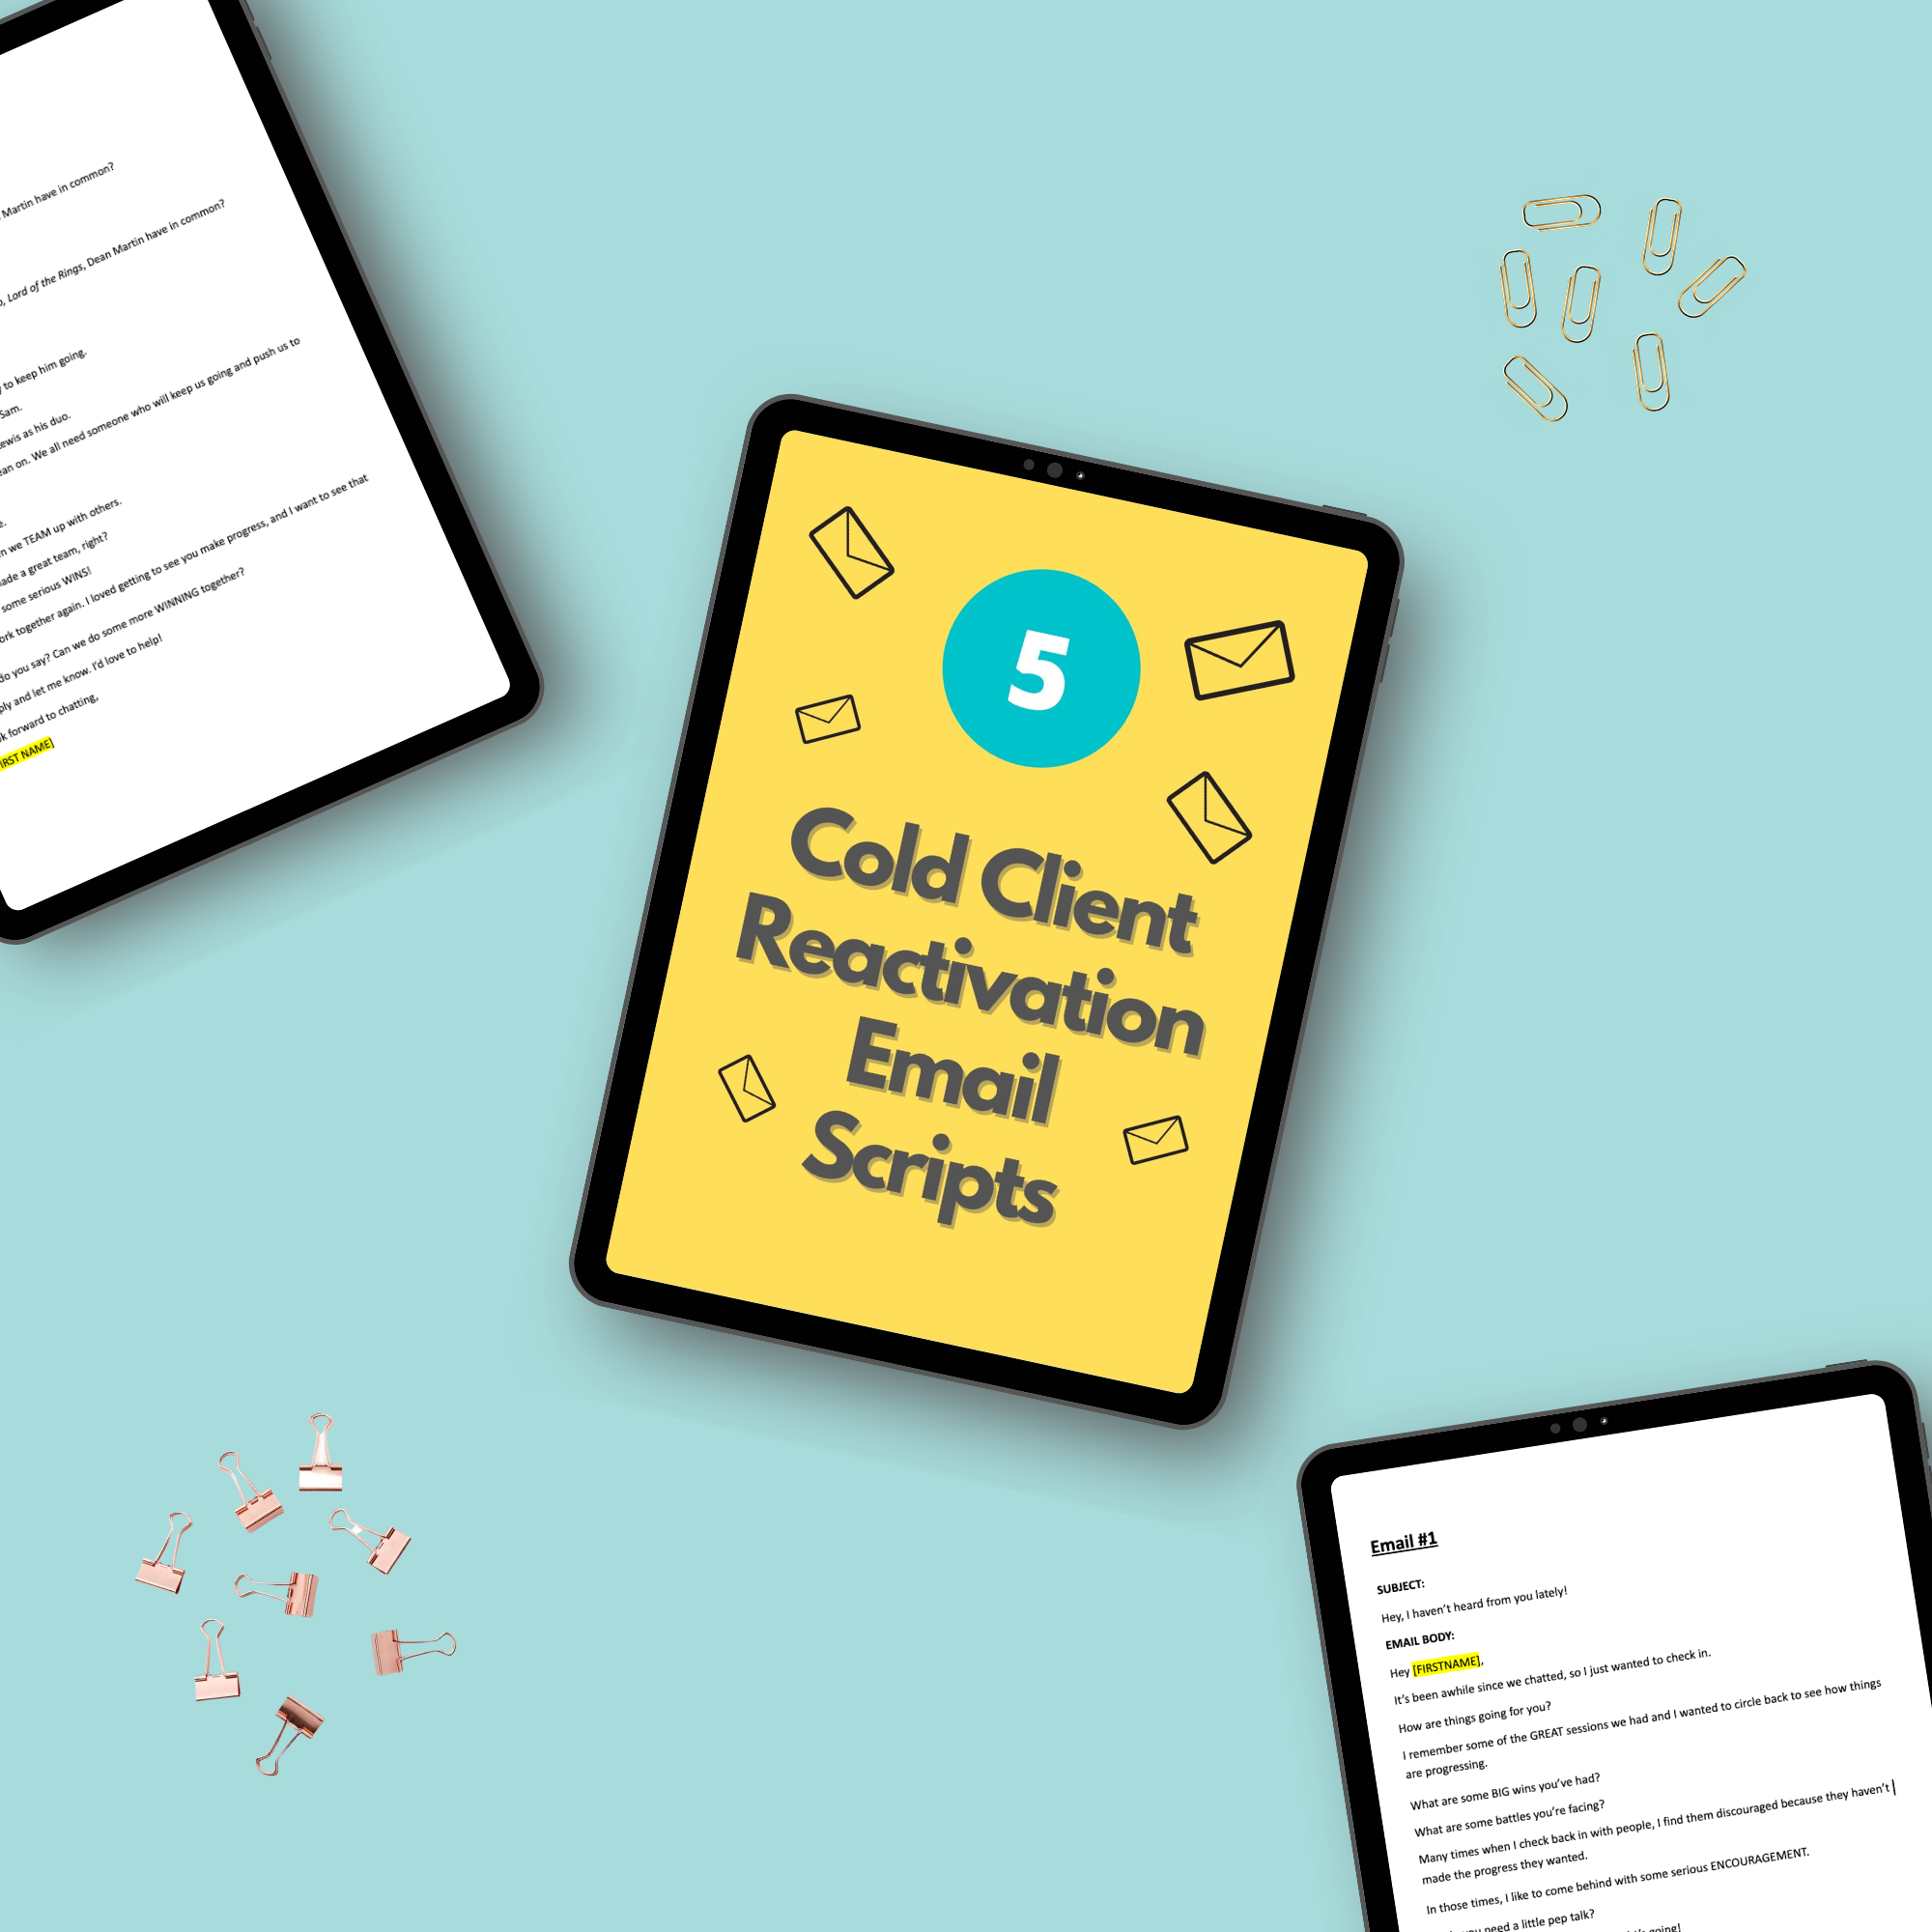 Cold Client Reactivation Email Sequence | Cold Client Reactivation Email Templates | Scripts for Coaches